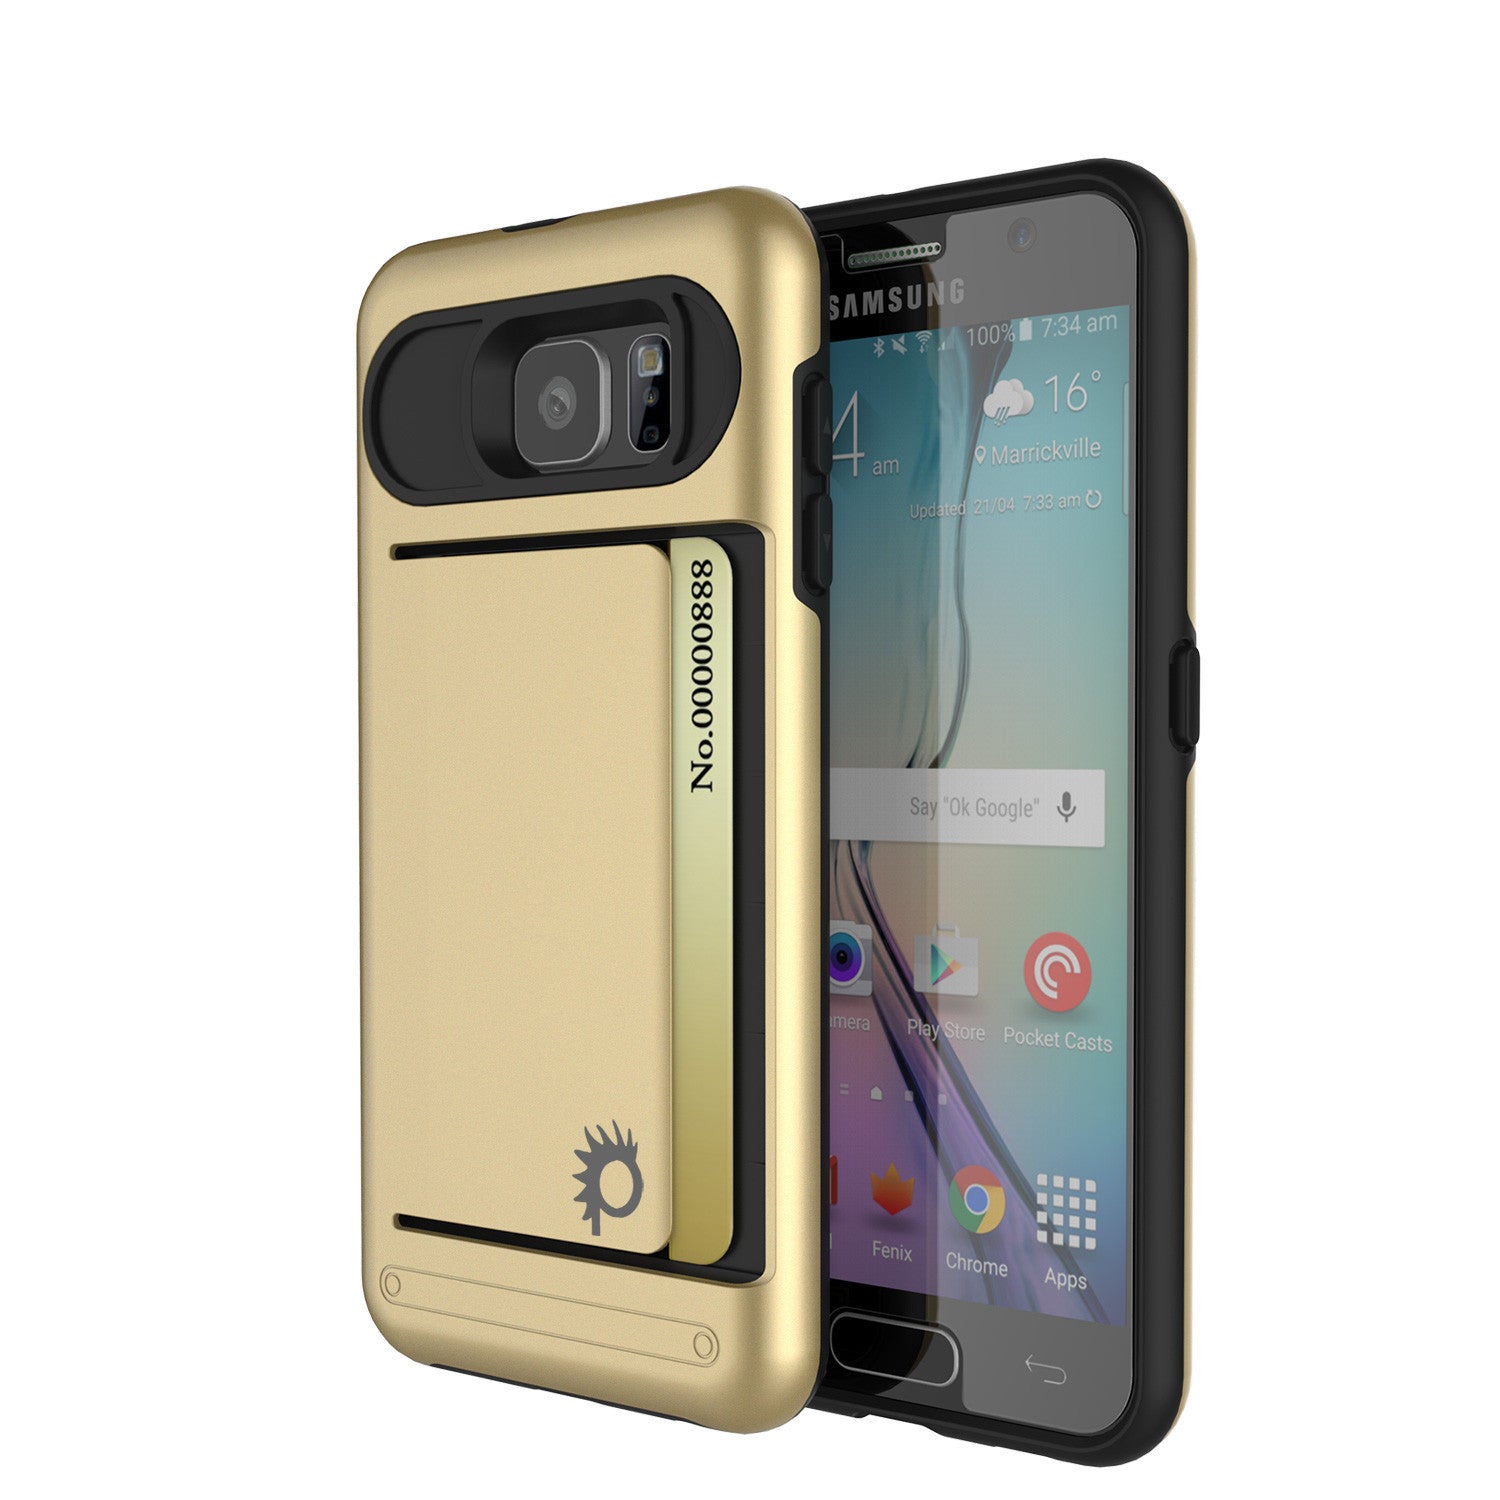 Galaxy s6 Case PunkCase CLUTCH Gold Series Slim Armor Soft Cover Case w/ Tempered Glass (Color in image: Gold)